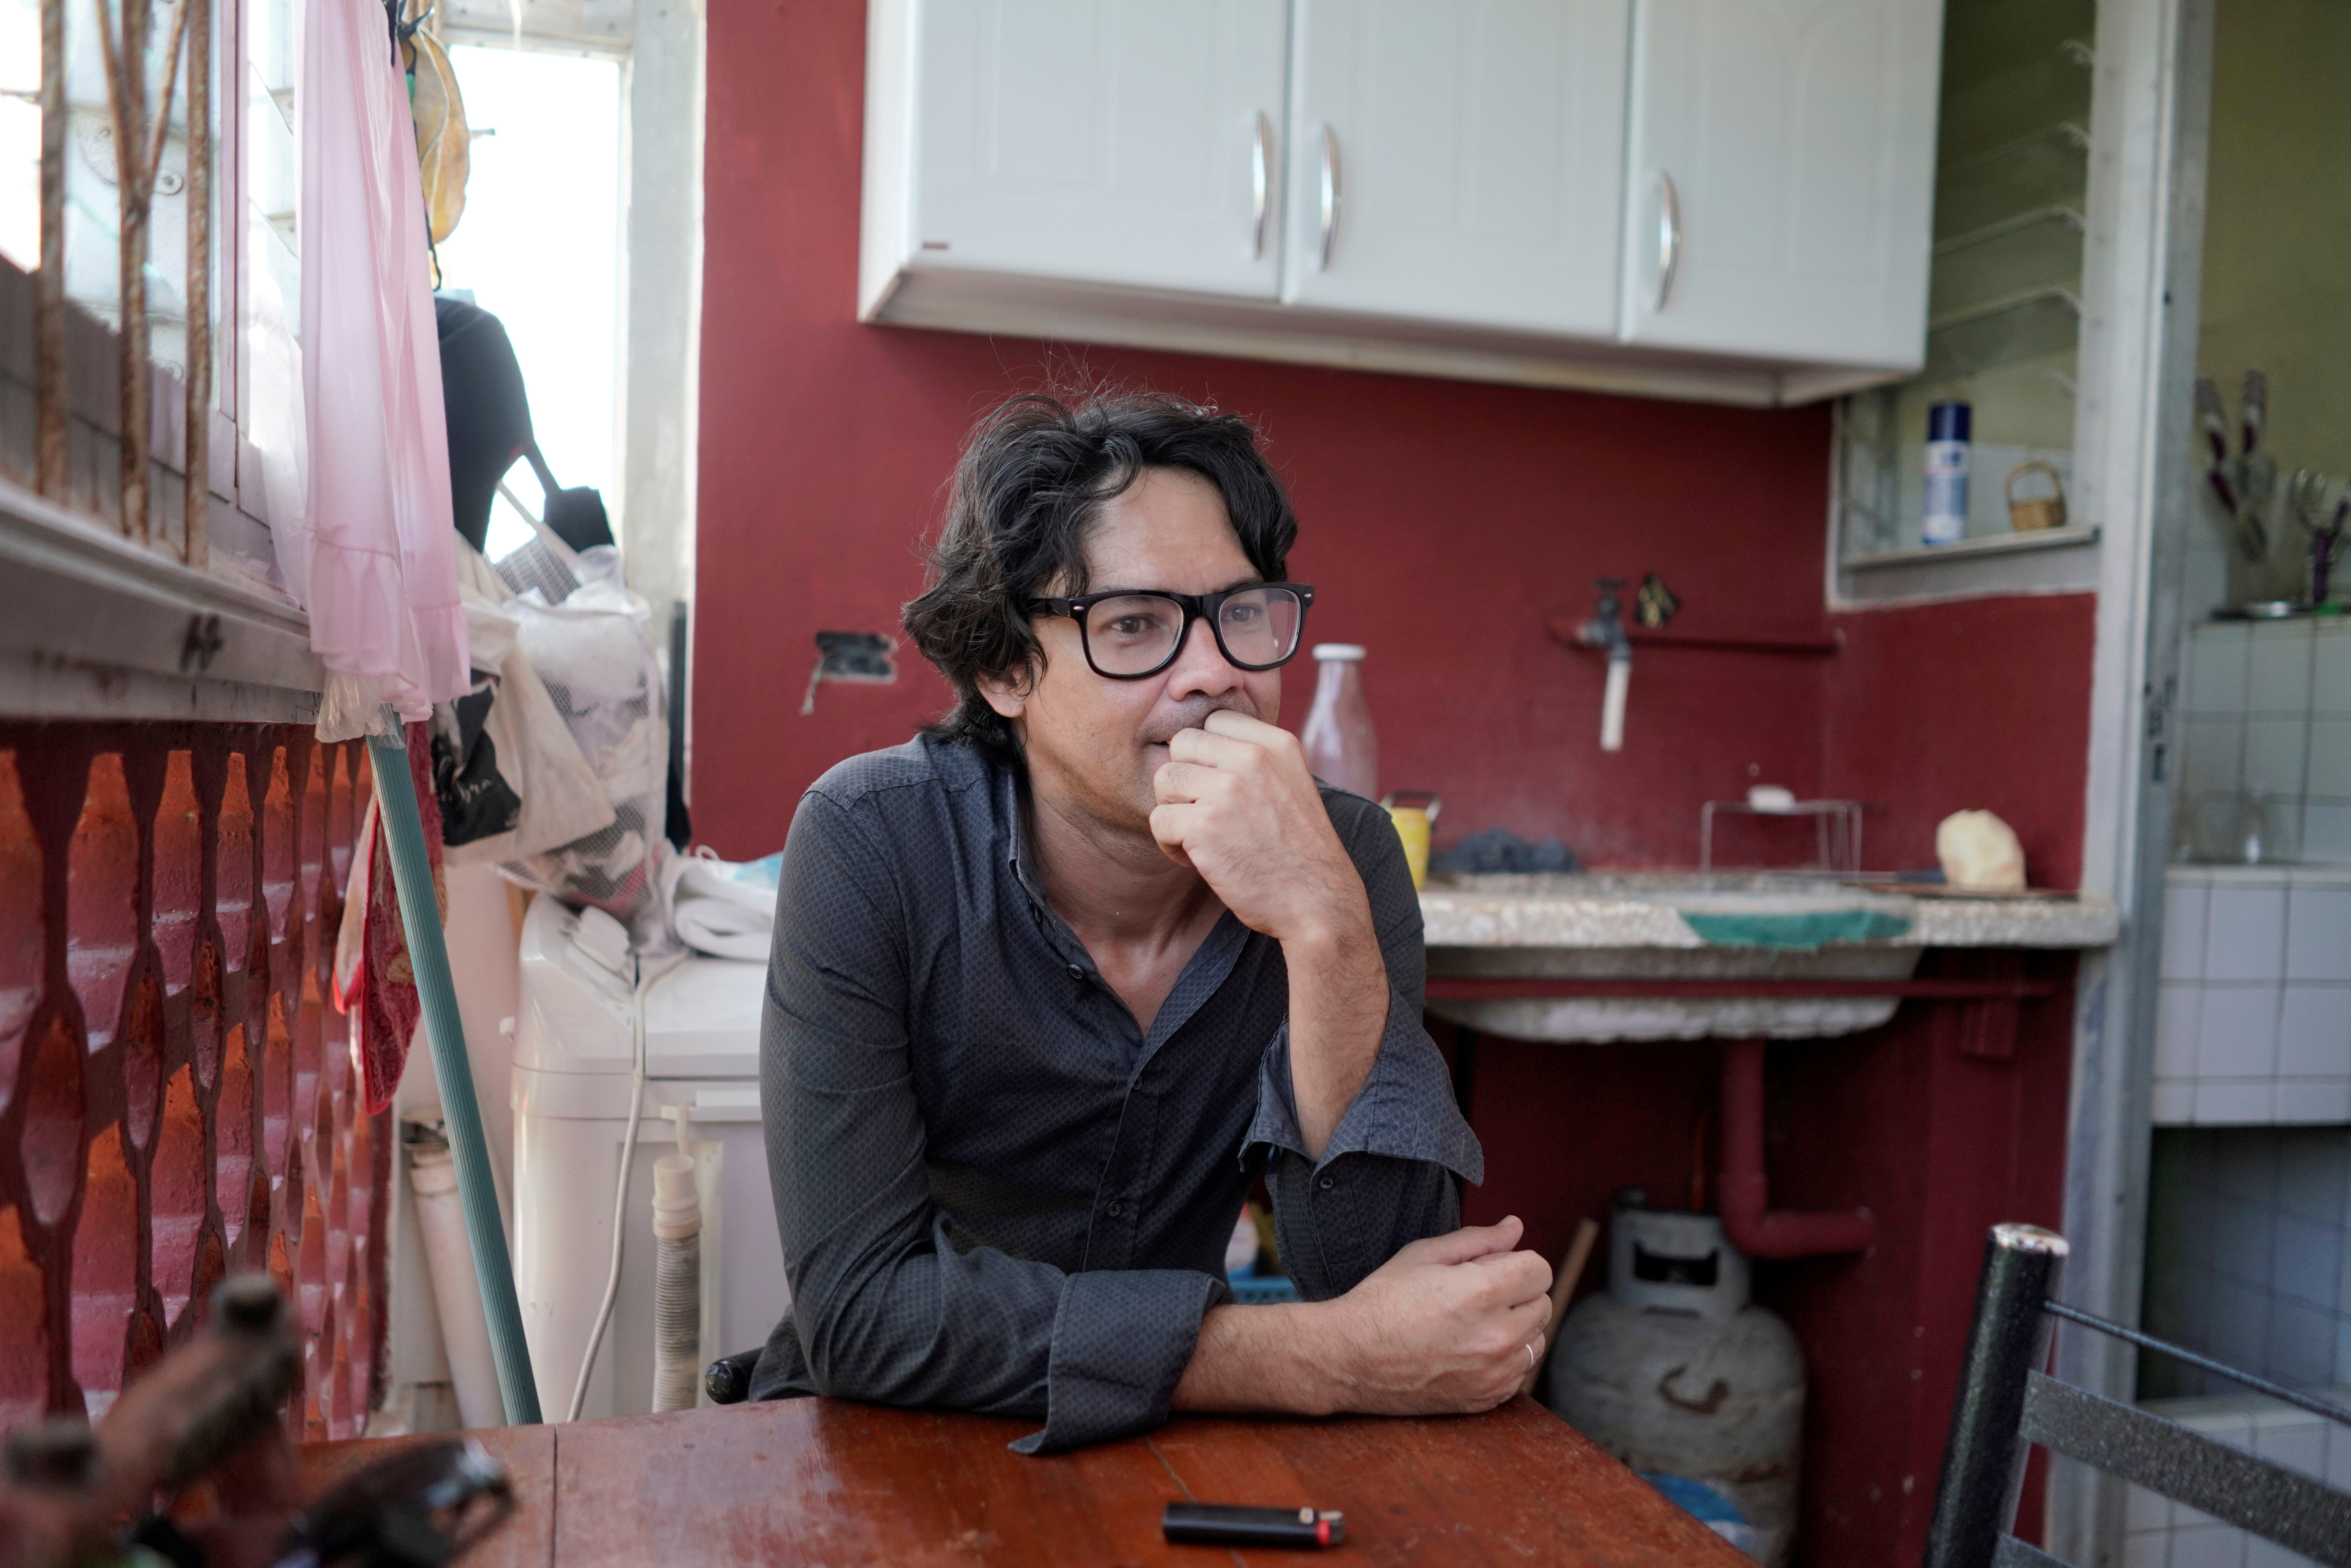 Actor and playwright Yunior Garcia gives an interview in Havana